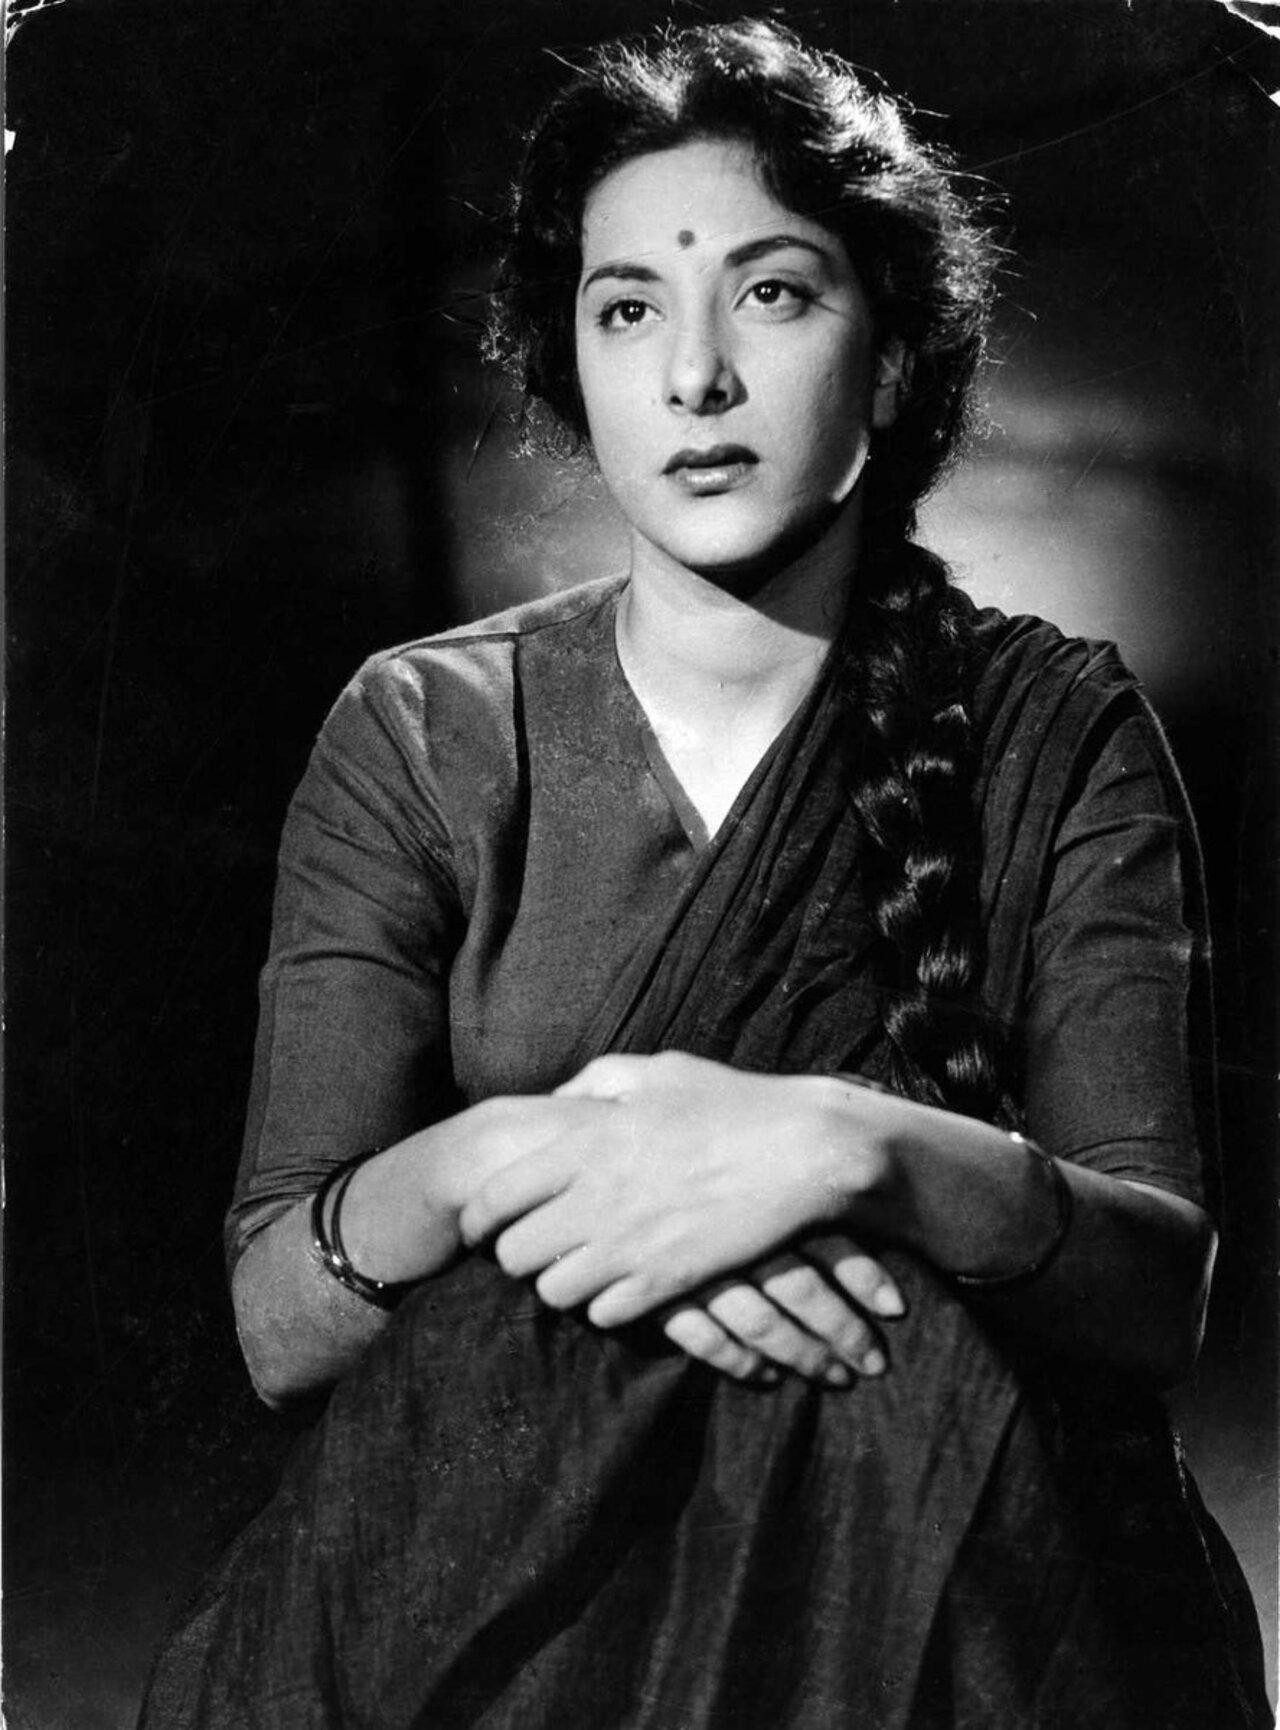 1950s Bollywood fashion - Nargis in 'Shree 420'
The 1950s, often hailed as the Golden Age of Indian Cinema, captured the fervor of a newly independent India. As the nation grappled with modernity versus tradition and the disparities between the rich and the poor, its cinema mirrored these sentiments.
Trailblazing actresses set fashion benchmarks through their on-screen personas. For instance, Nargis's effortlessly elegant sarees with a relaxed pallu in 'Shree 420' became iconic.
 